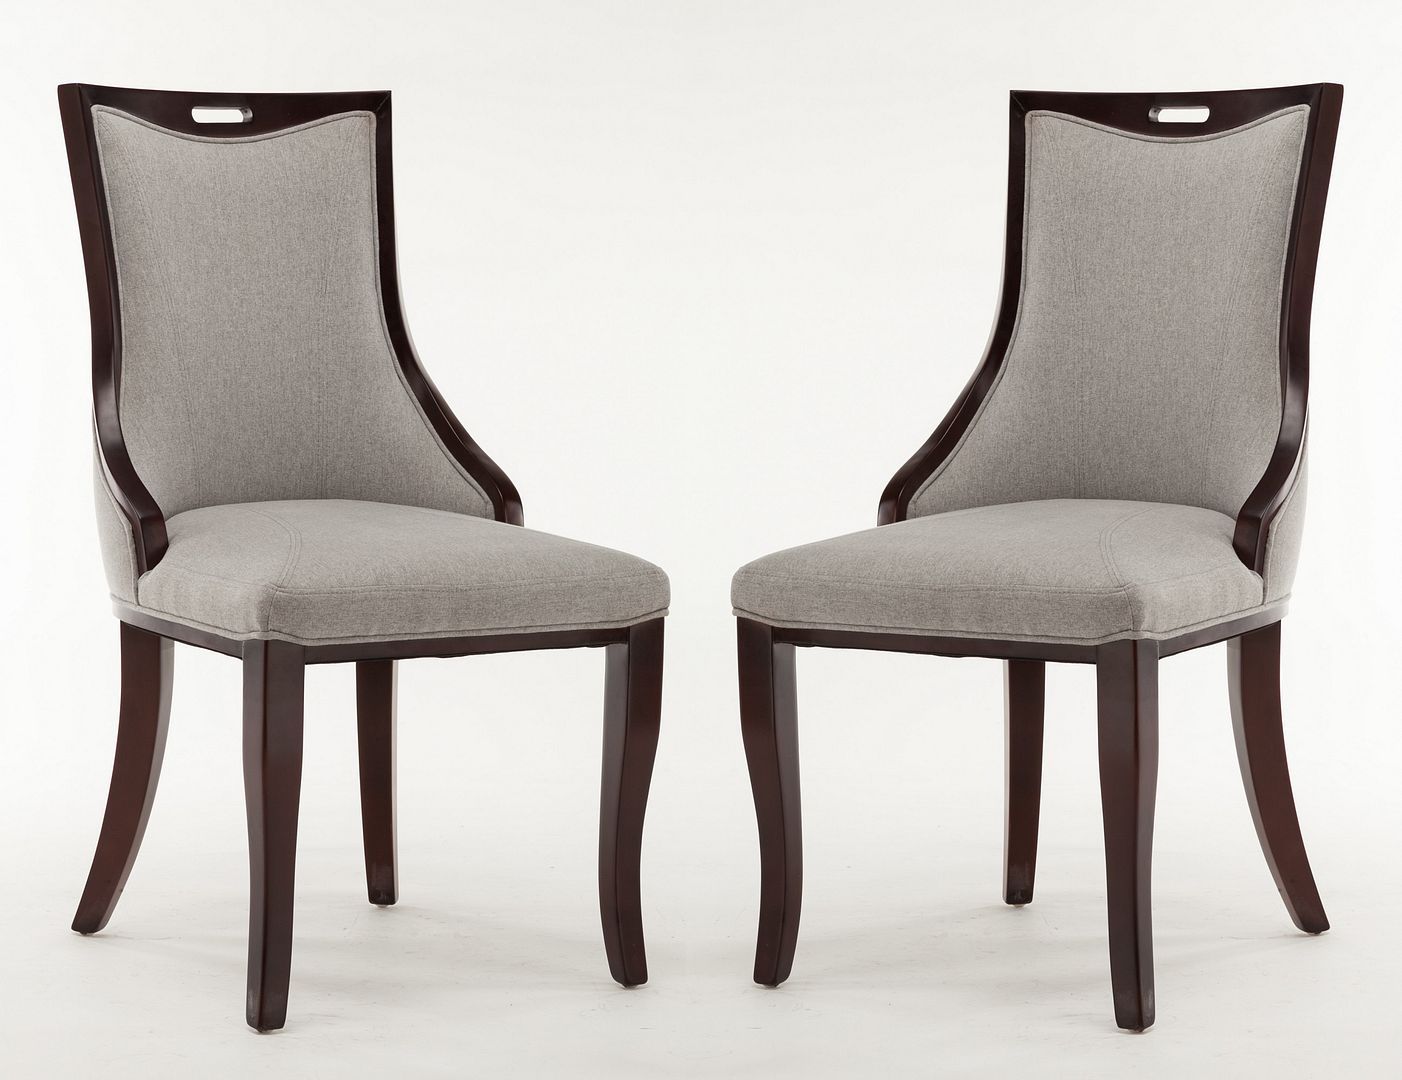 Emperor Twill Fabric Dining Chair - Set of 2